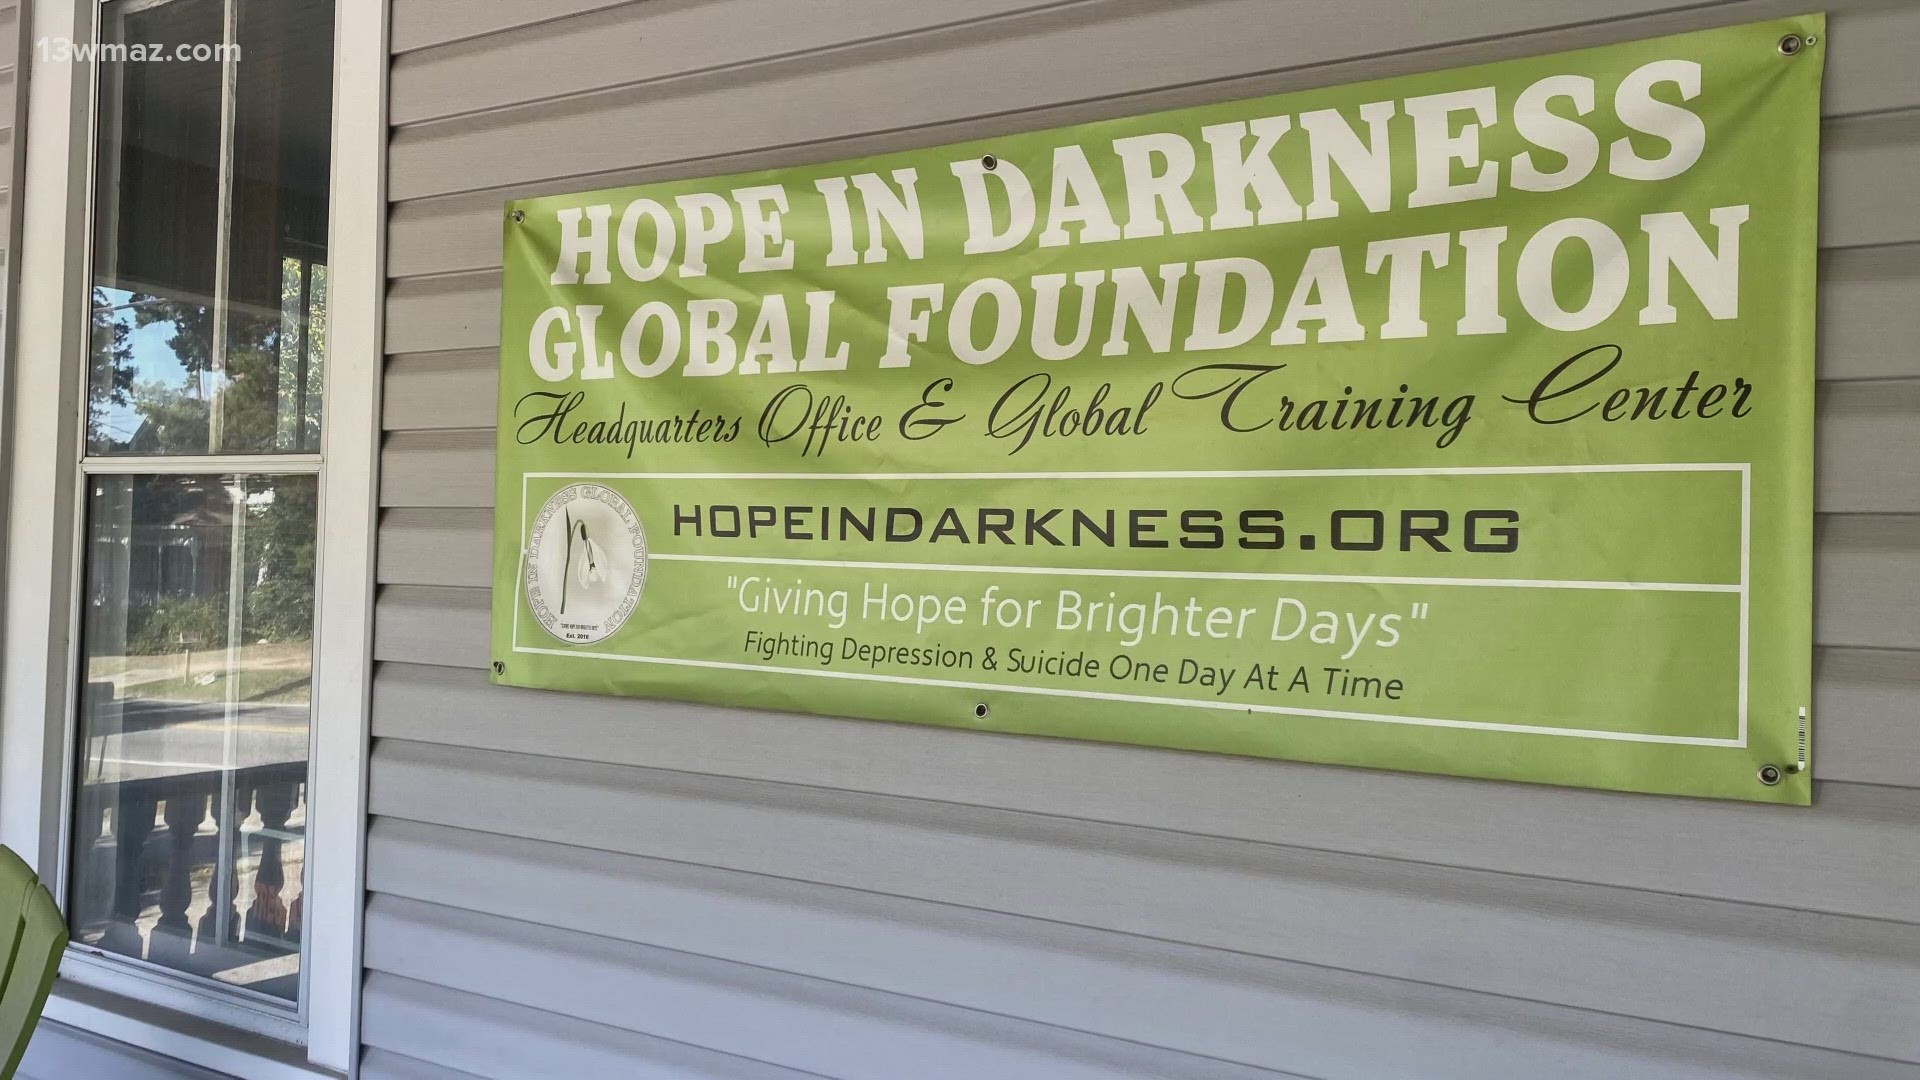 The district can't do everything on their own, so they rely on community partnerships with groups like Hope in Darkness Global Foundation.